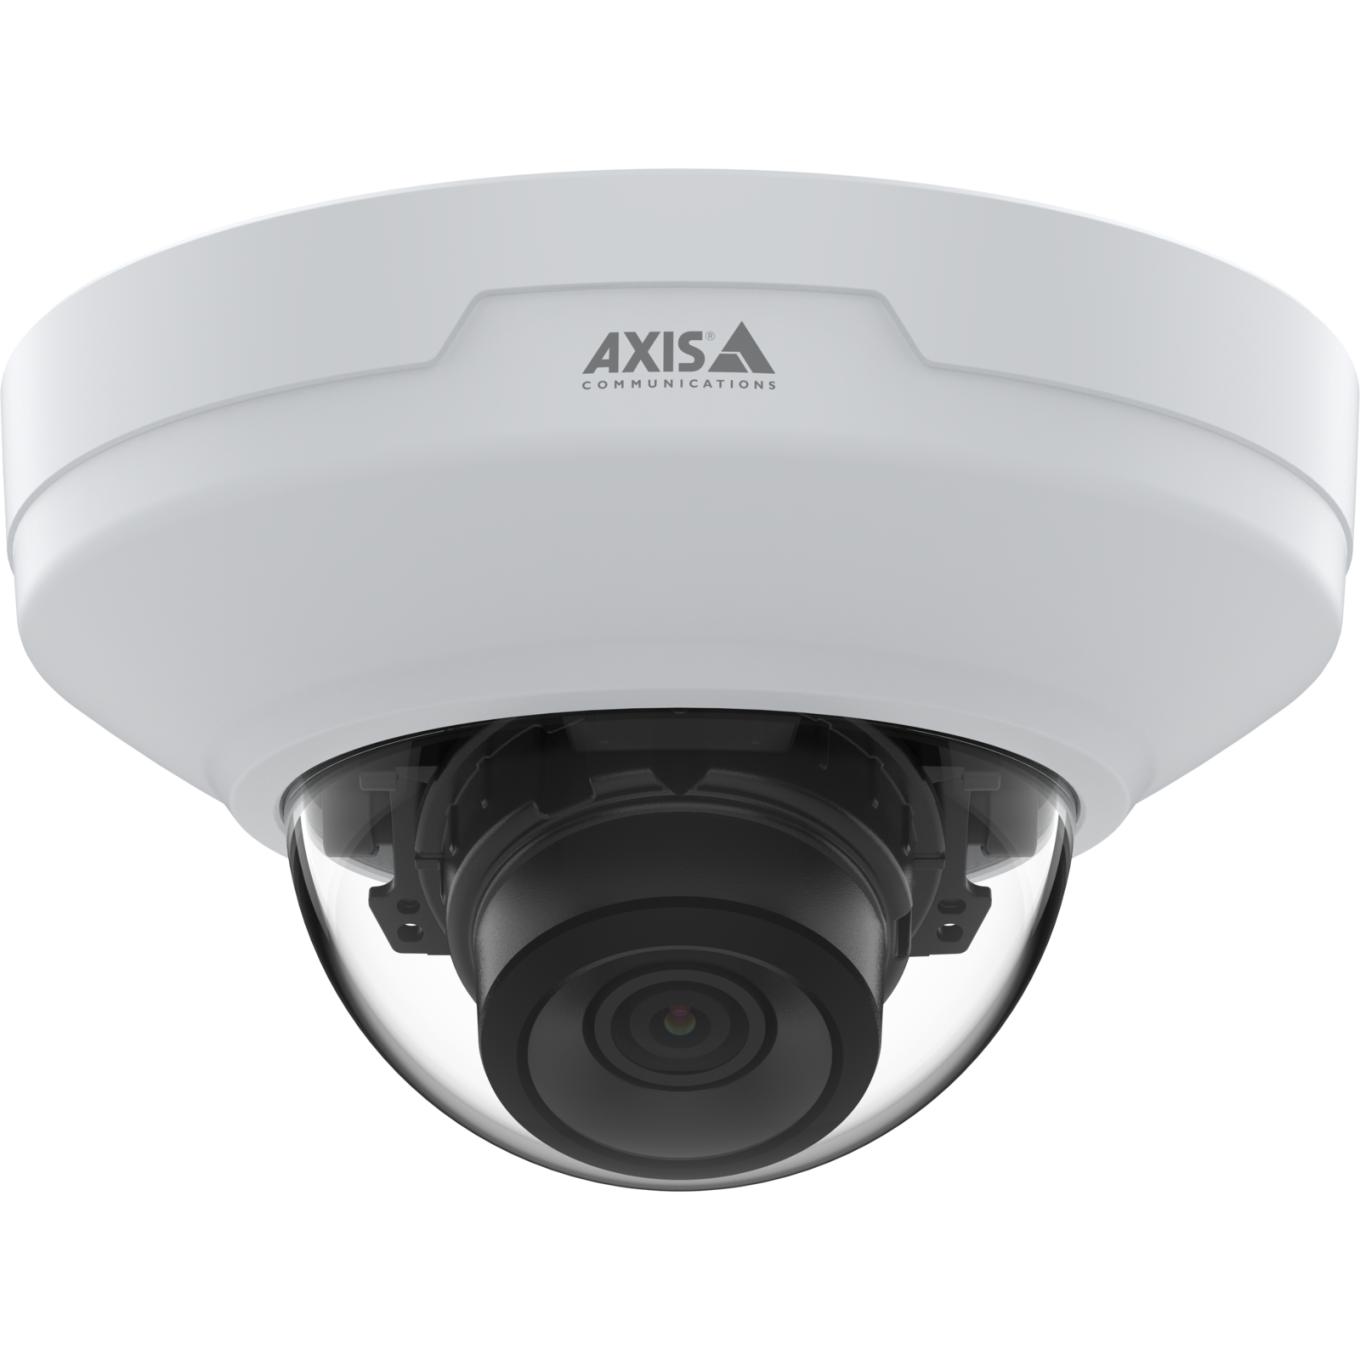 AXIS M4215-LV Dome Camera、正面から見た図